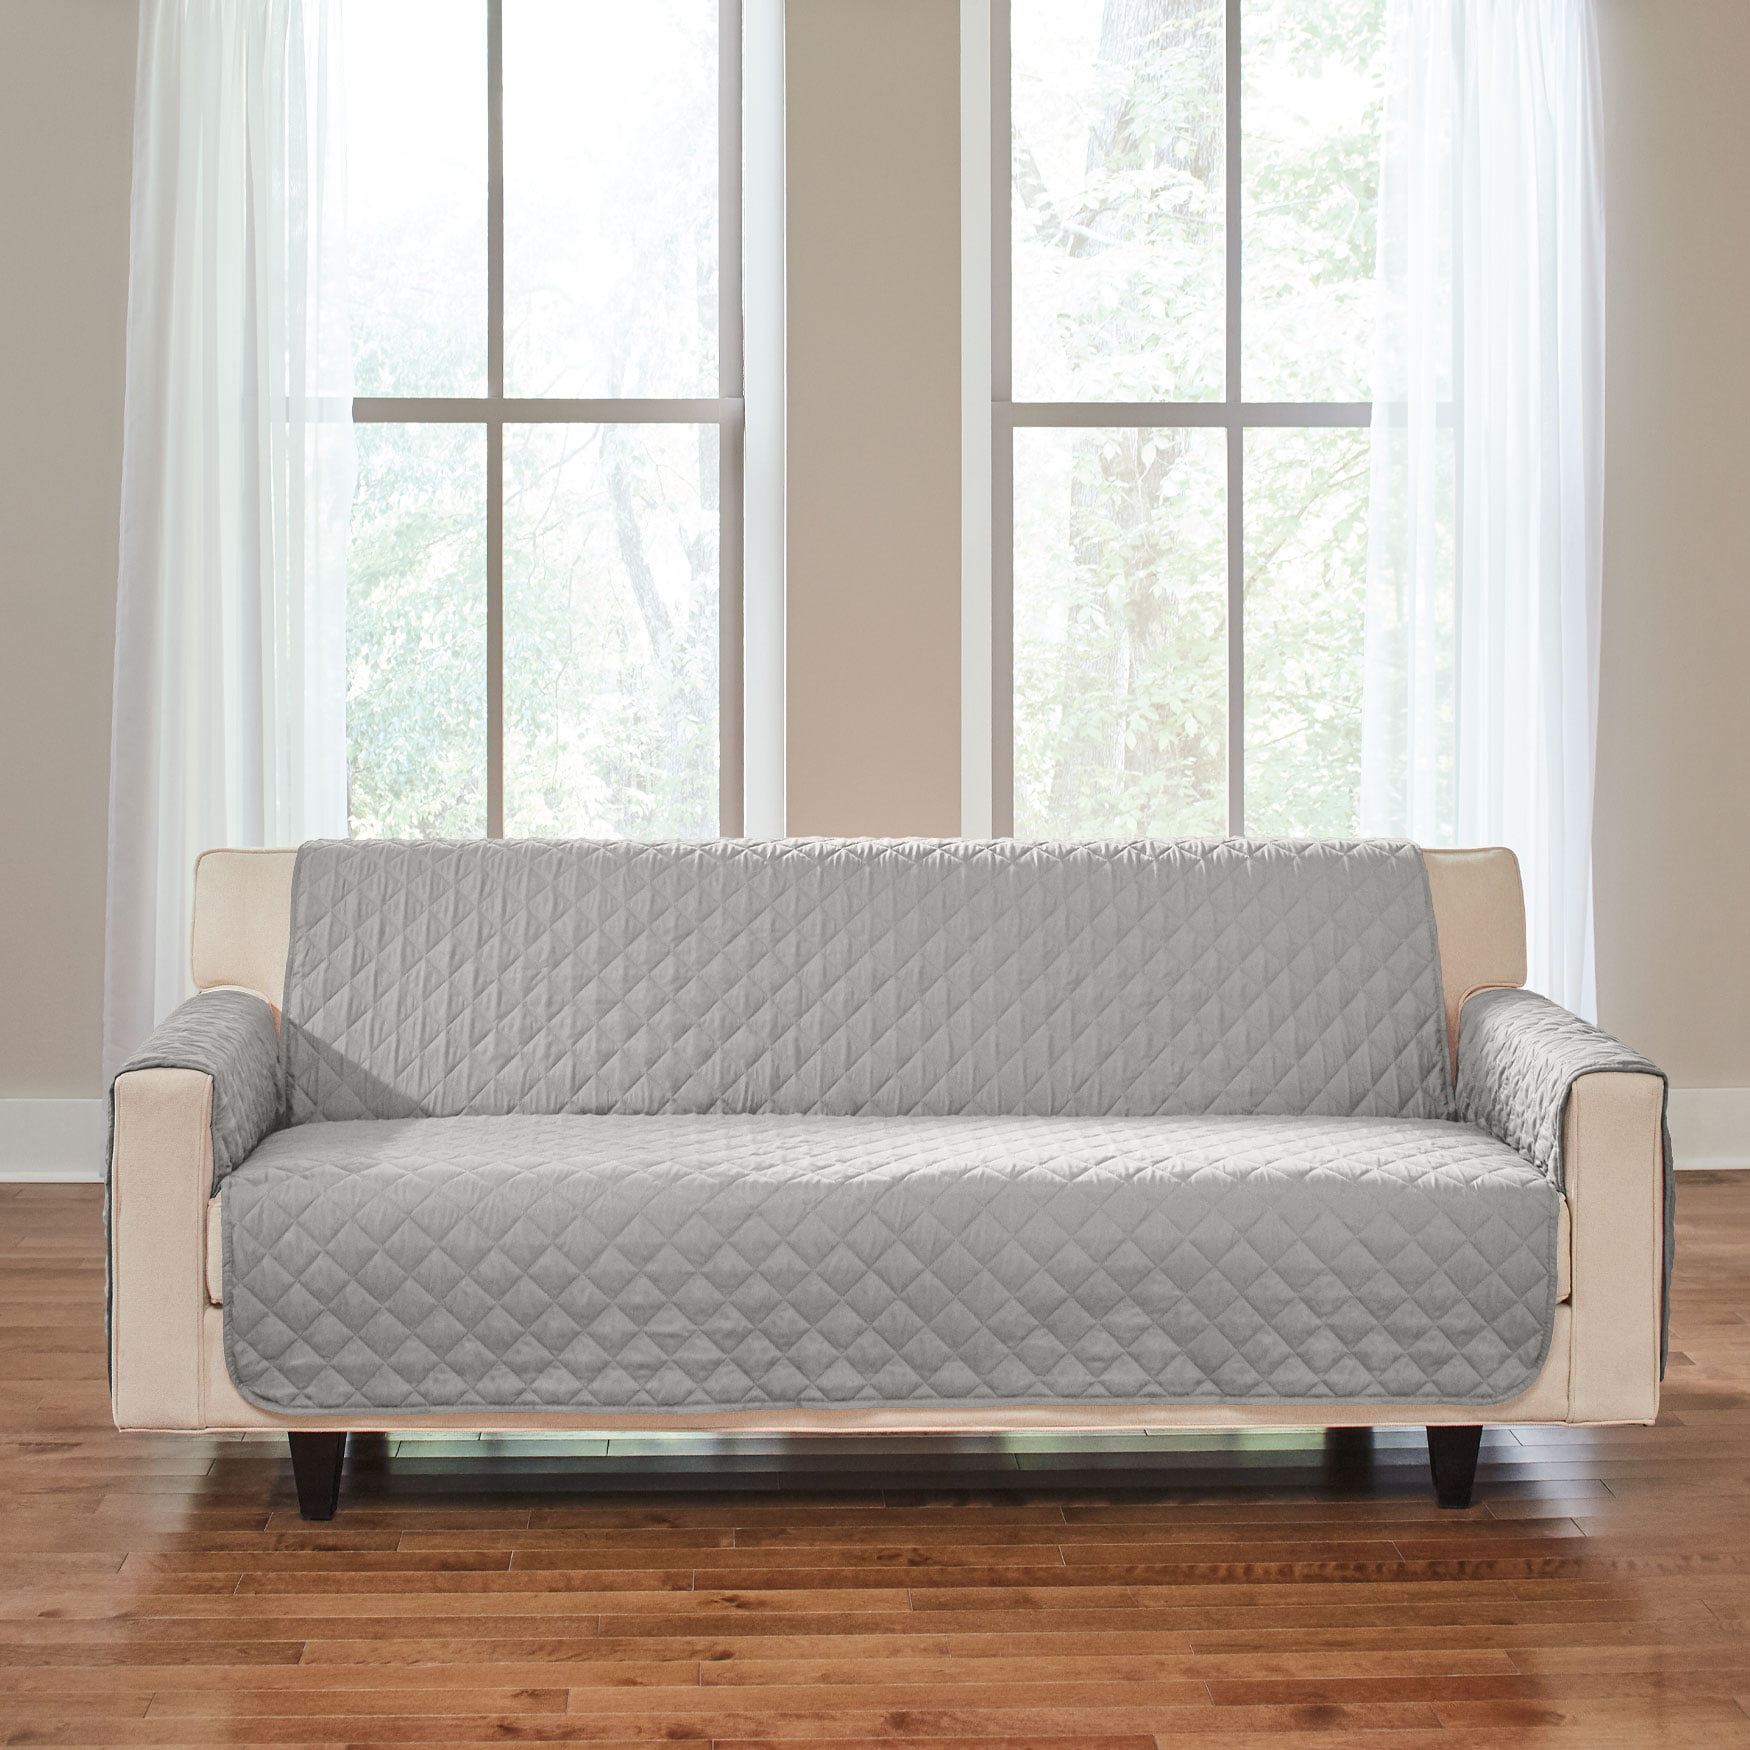 Details about   Stretch Cushion CoverFurniture ProtectorSofa Slipcover with Elastic Bottom 